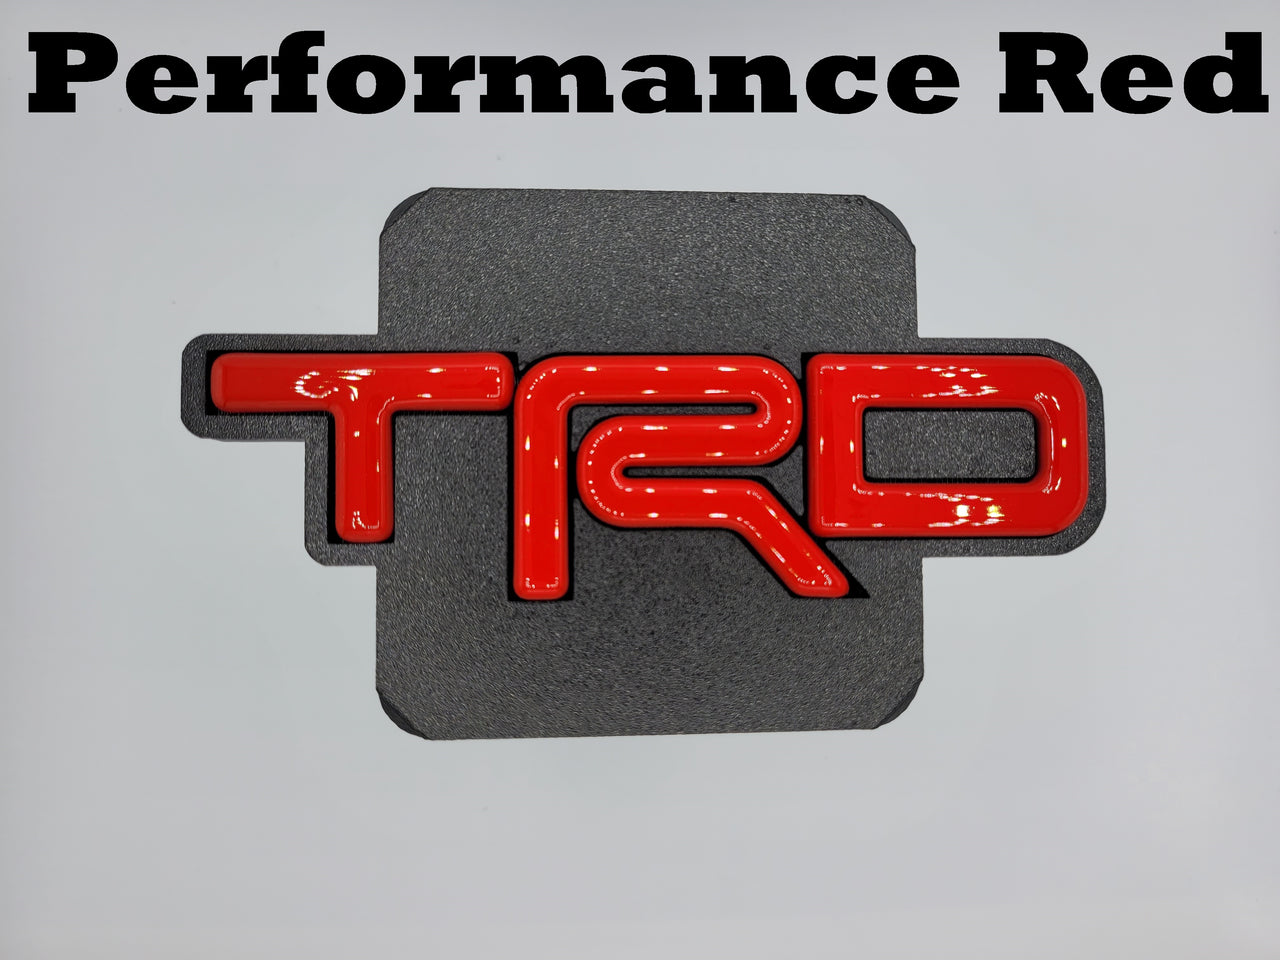 TRD Hitch Cover